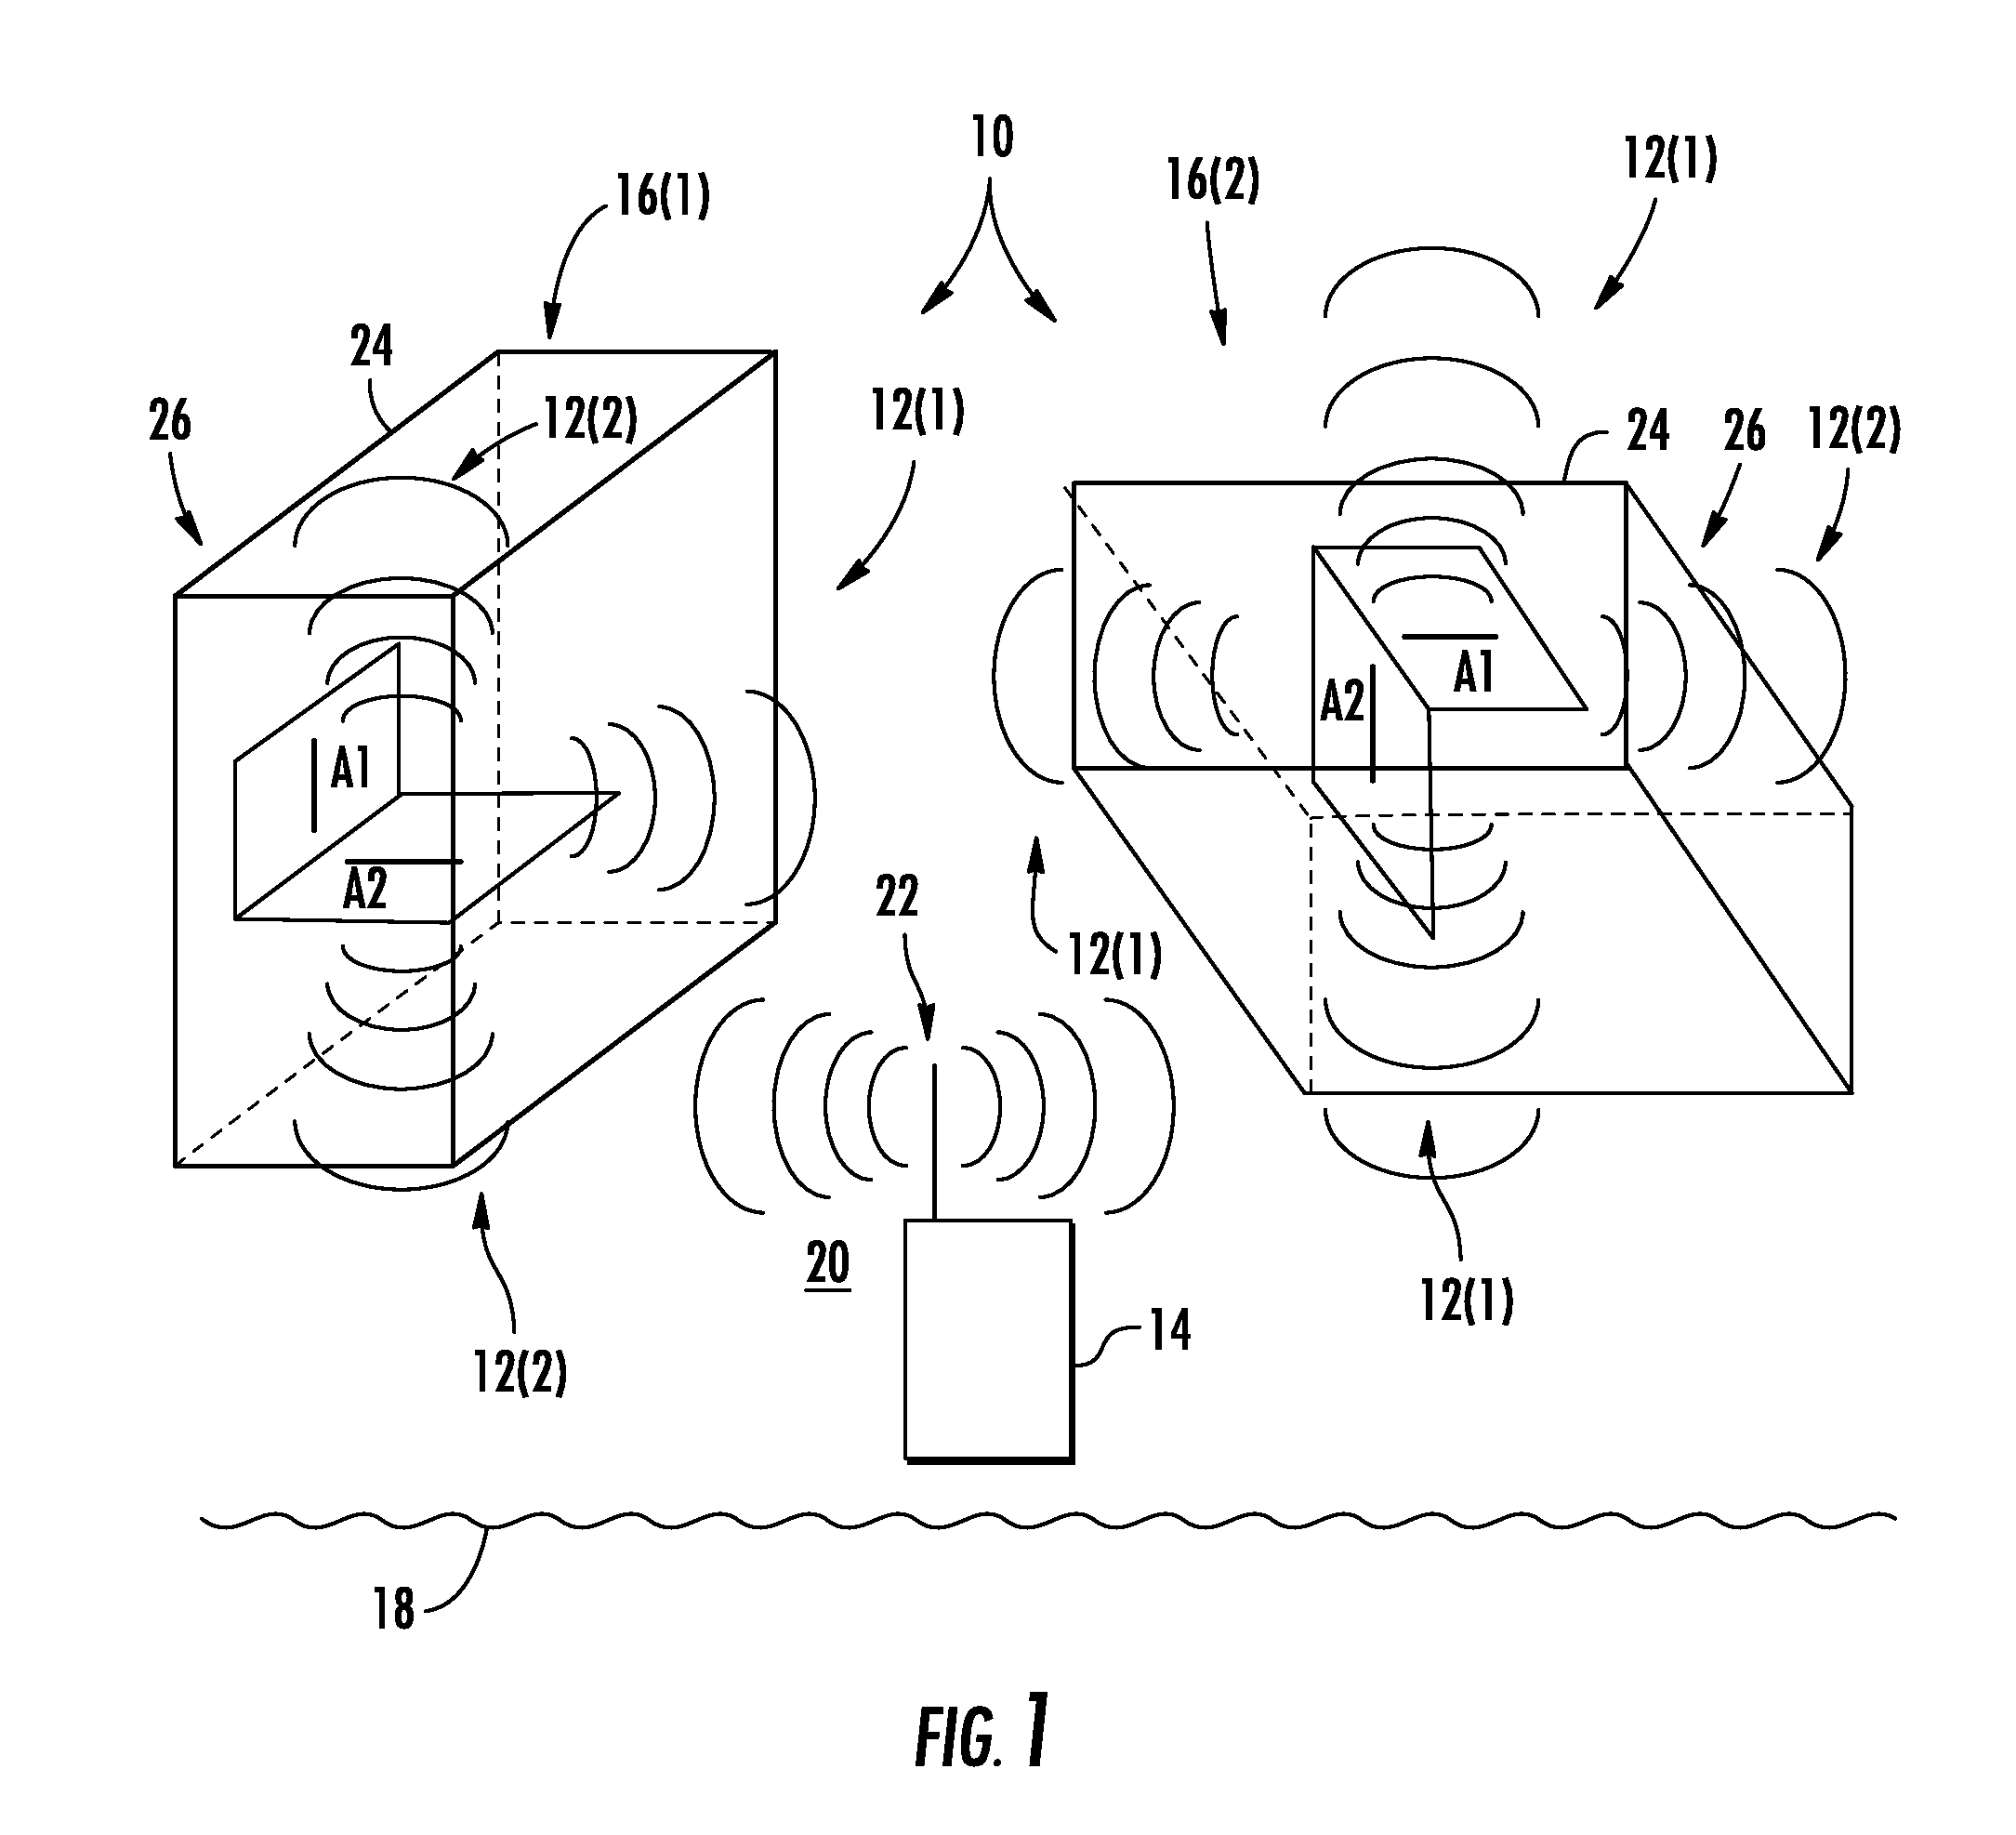 Antenna selection based on orientation, and related apparatuses, antenna units, methods, and distributed antenna systems